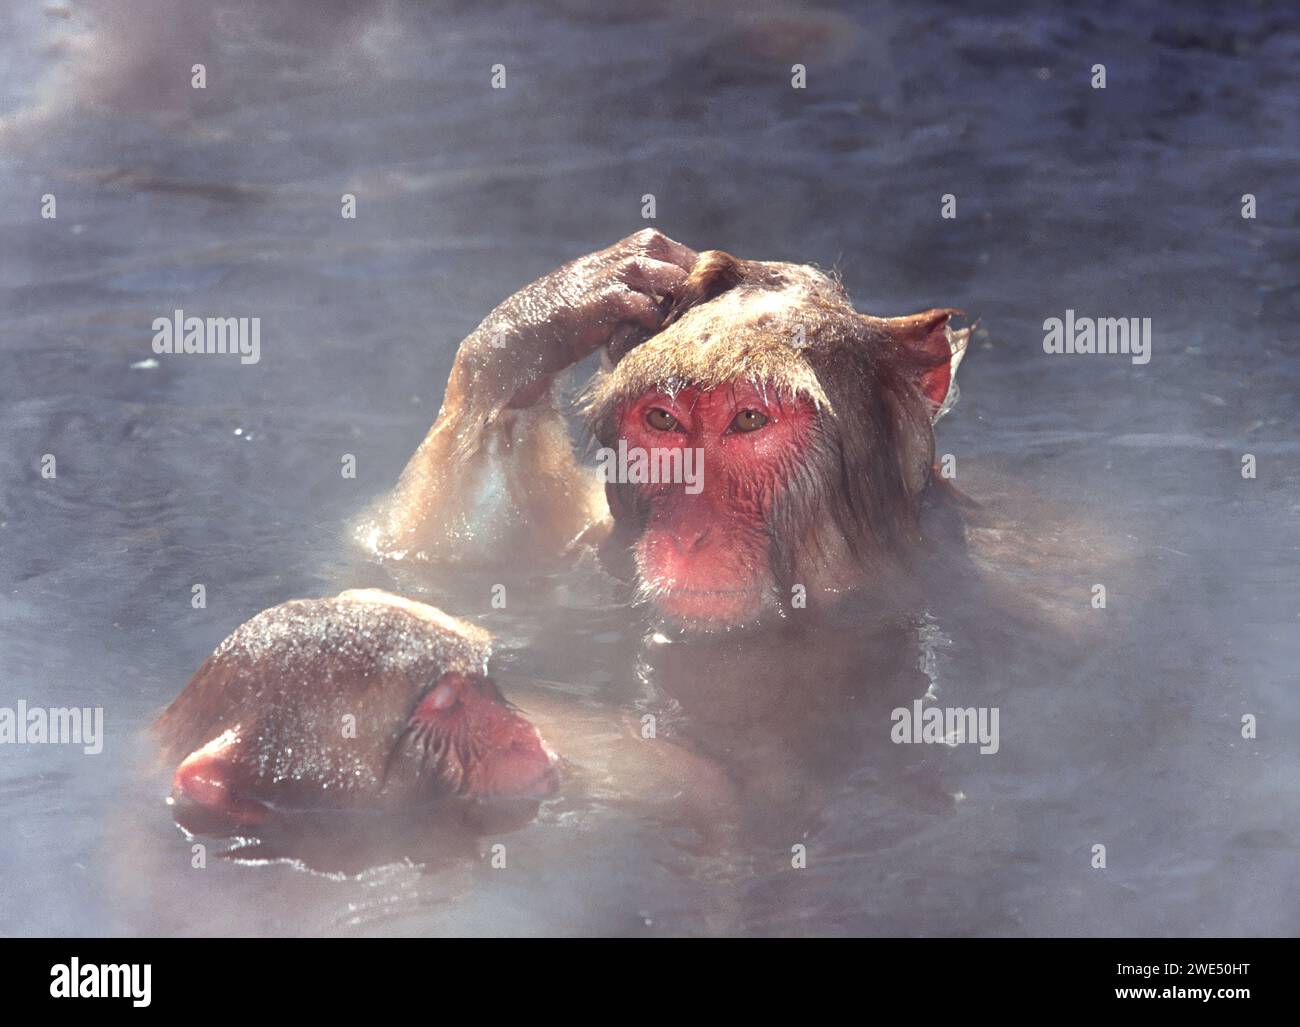 Japanese macaques Macaca fuscata in a hot spring pool with steam in winter Stock Photo